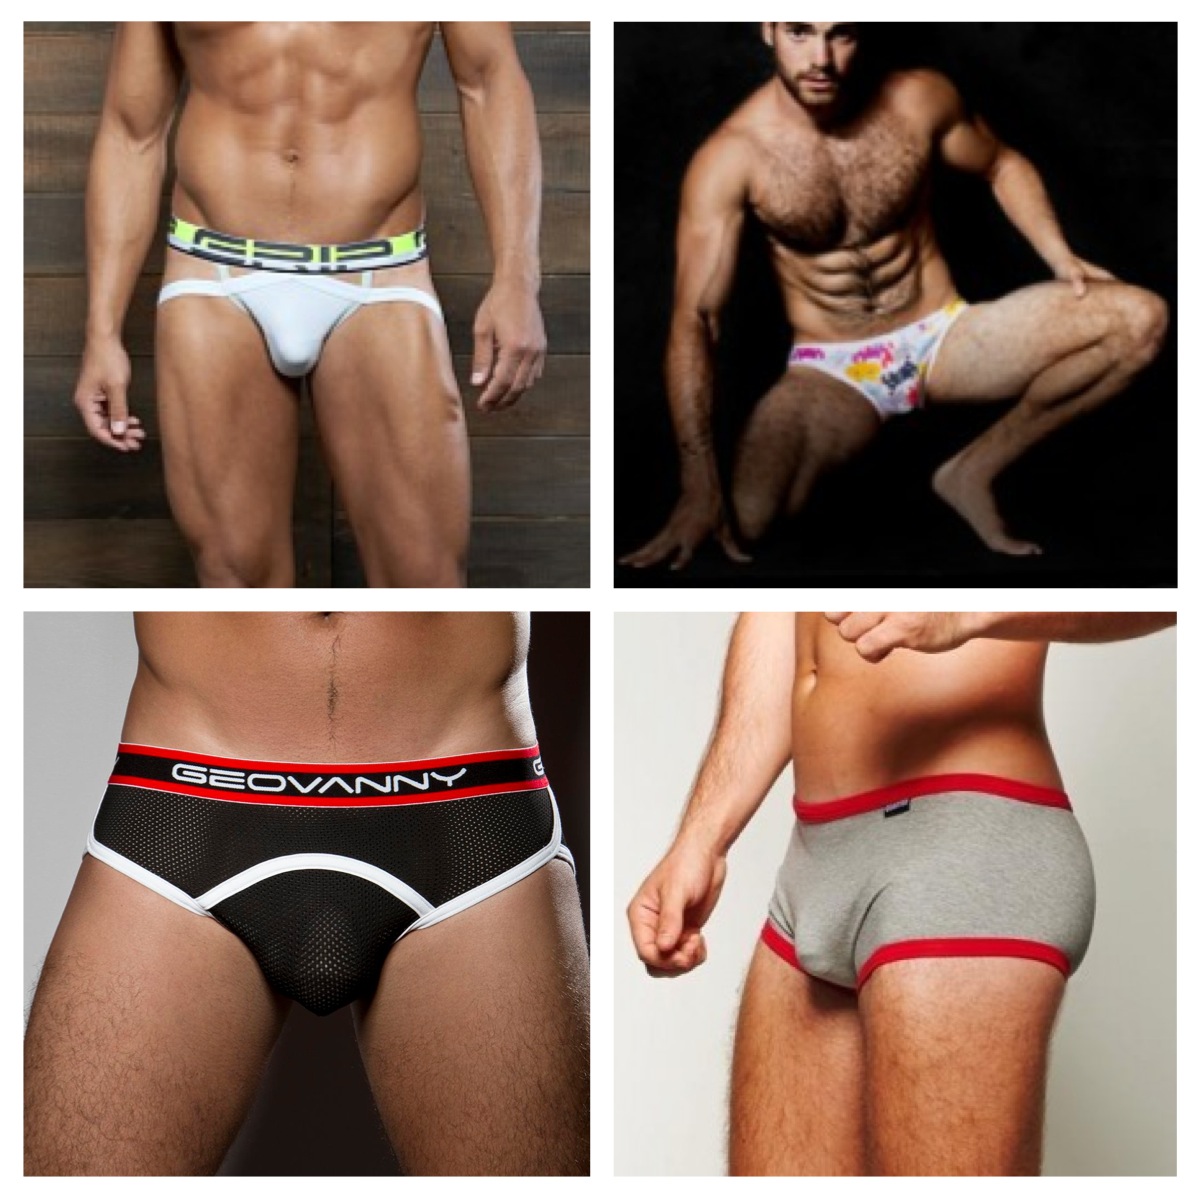 Vote for Underwear of the Month